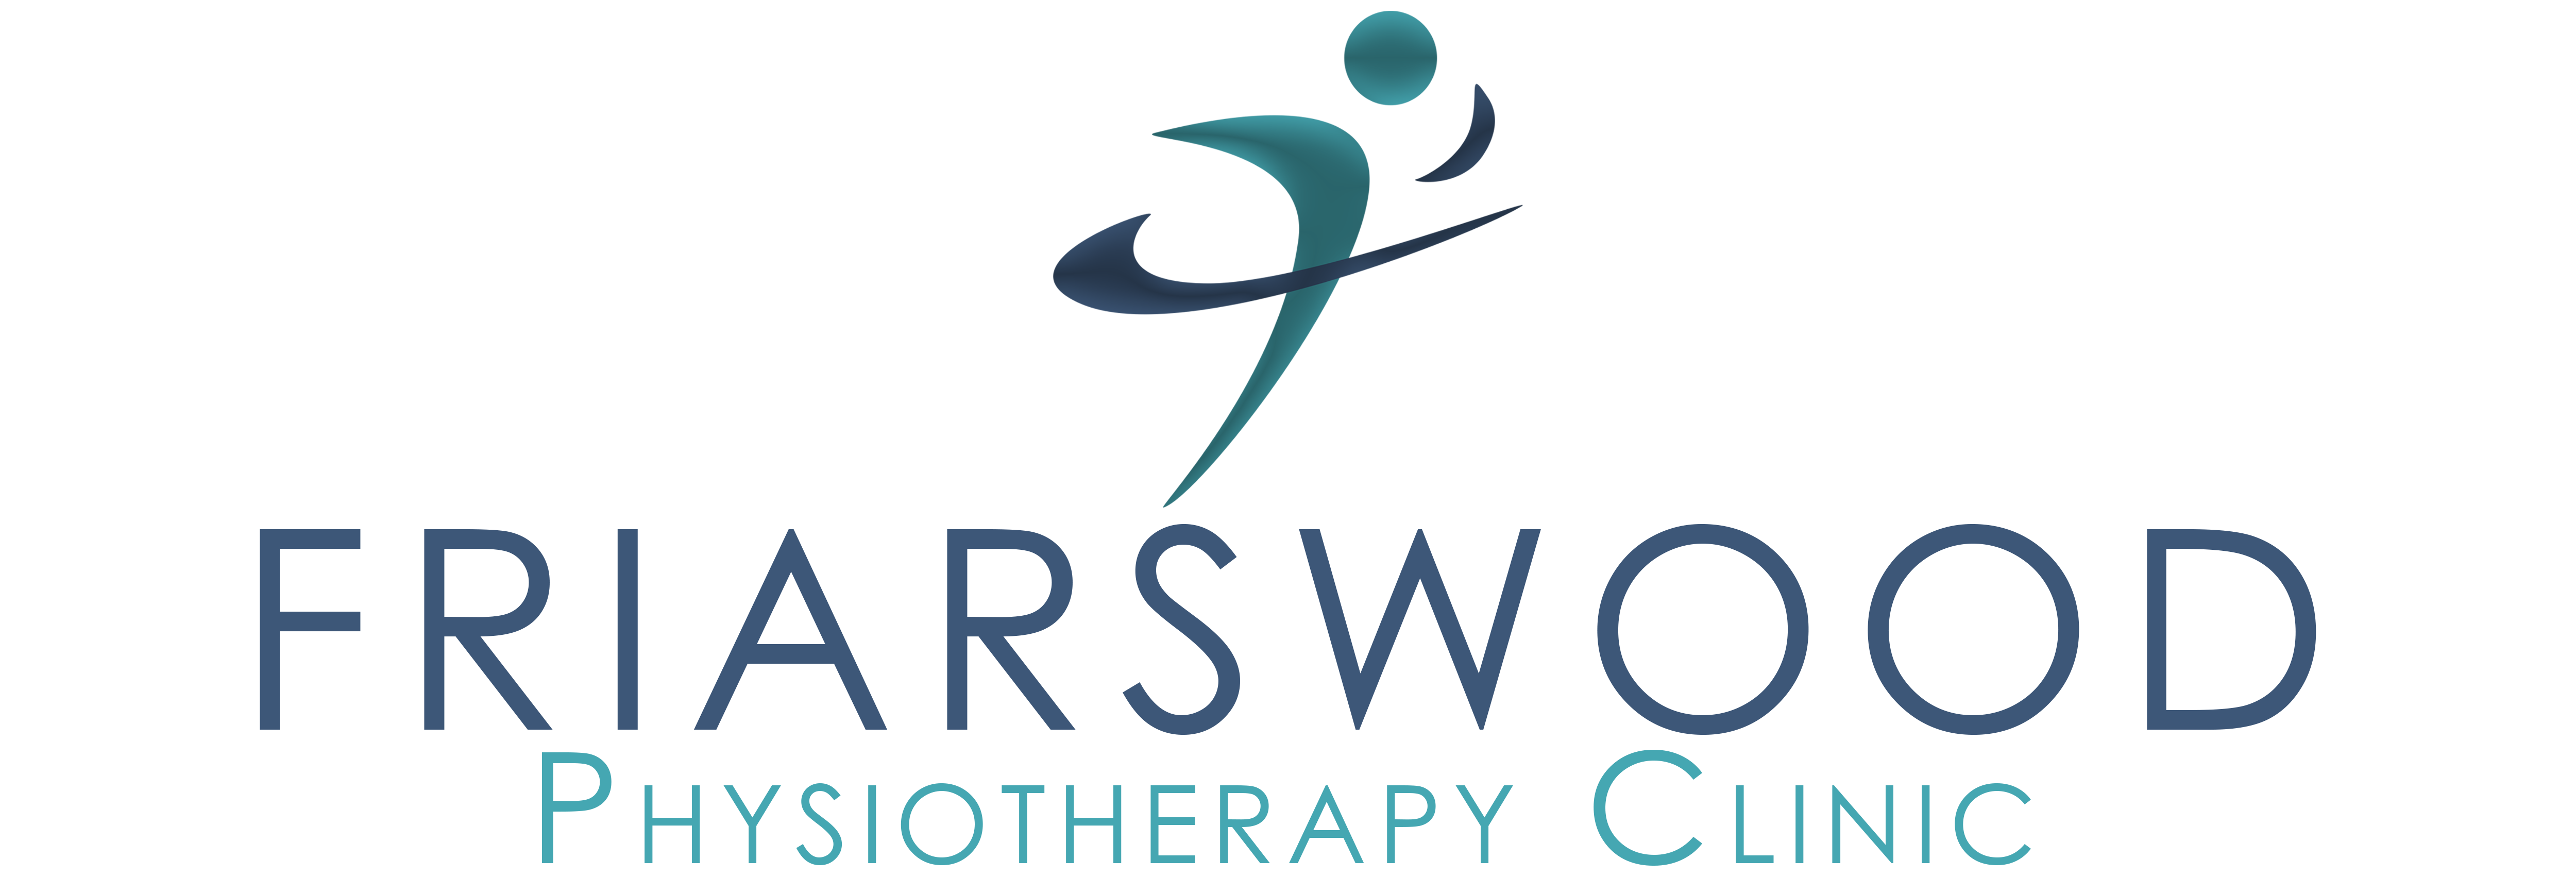 Friarswood Physiotherapy Clinic